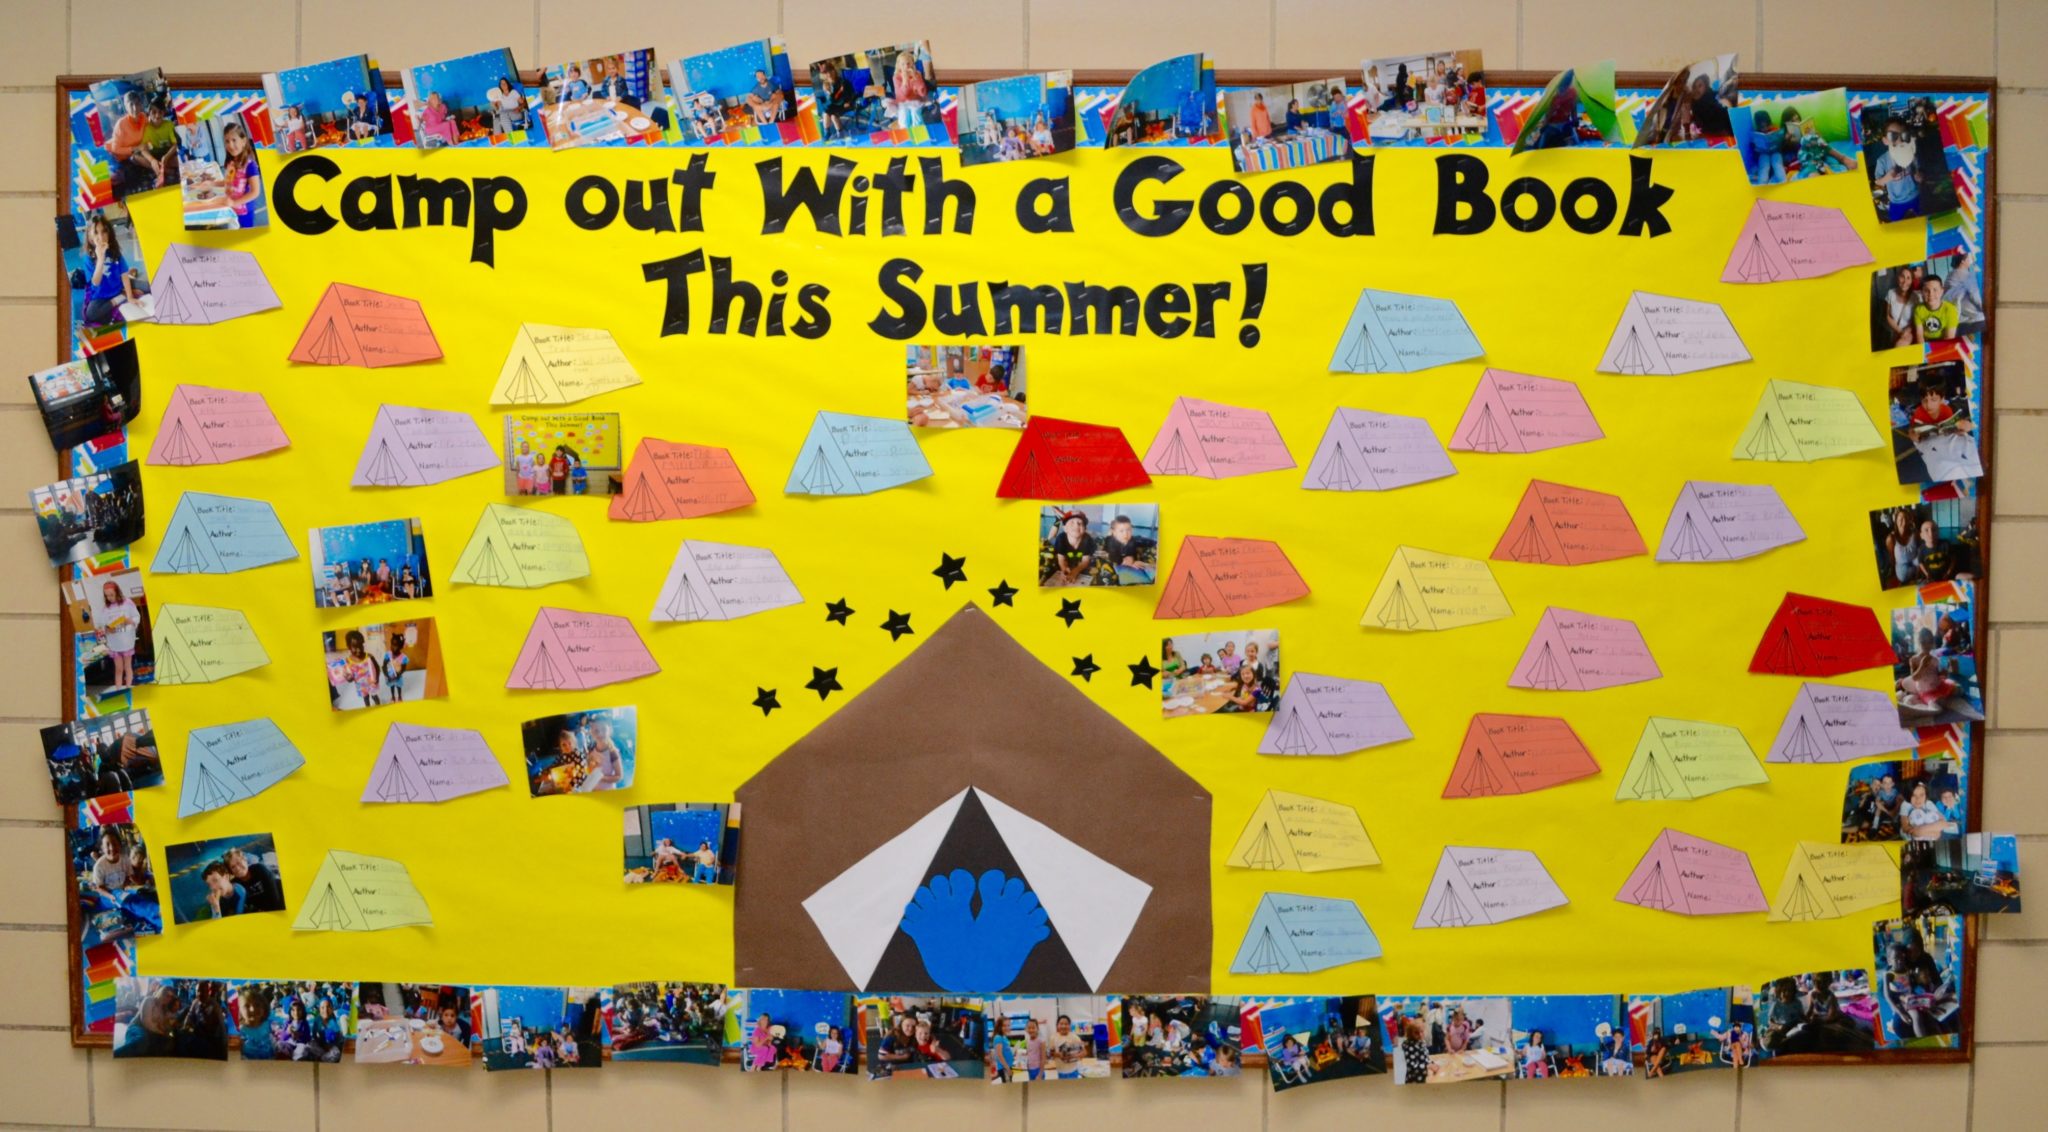 Clarke school bulletin board - camp out with a good book this summer. Shows mini tents and a large tent and students reading